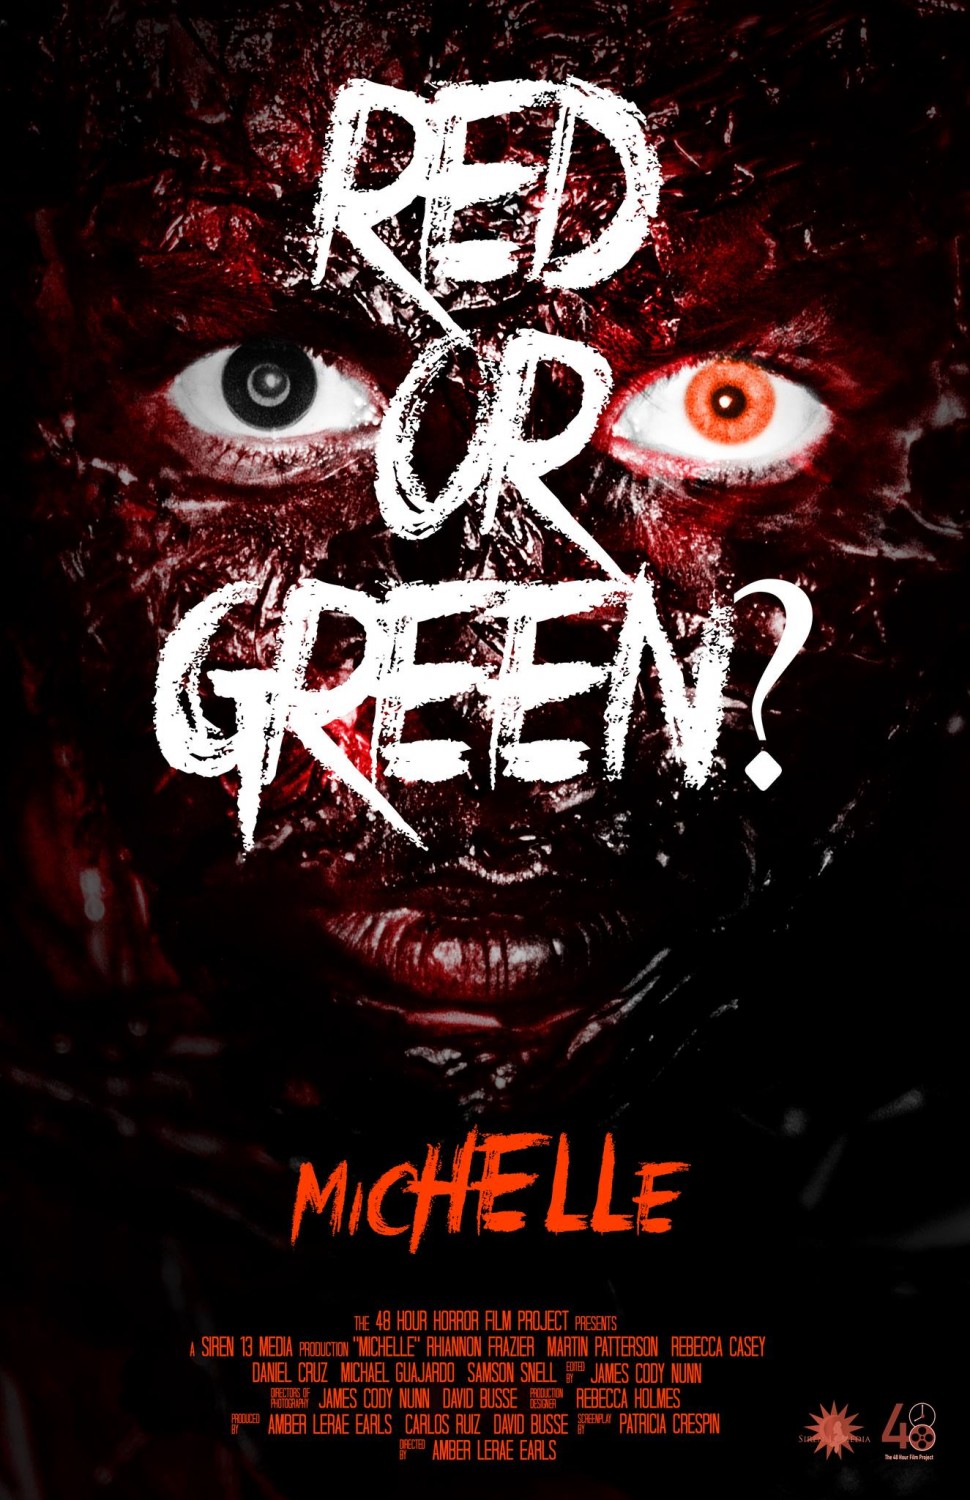 Extra Large Movie Poster Image for Michelle